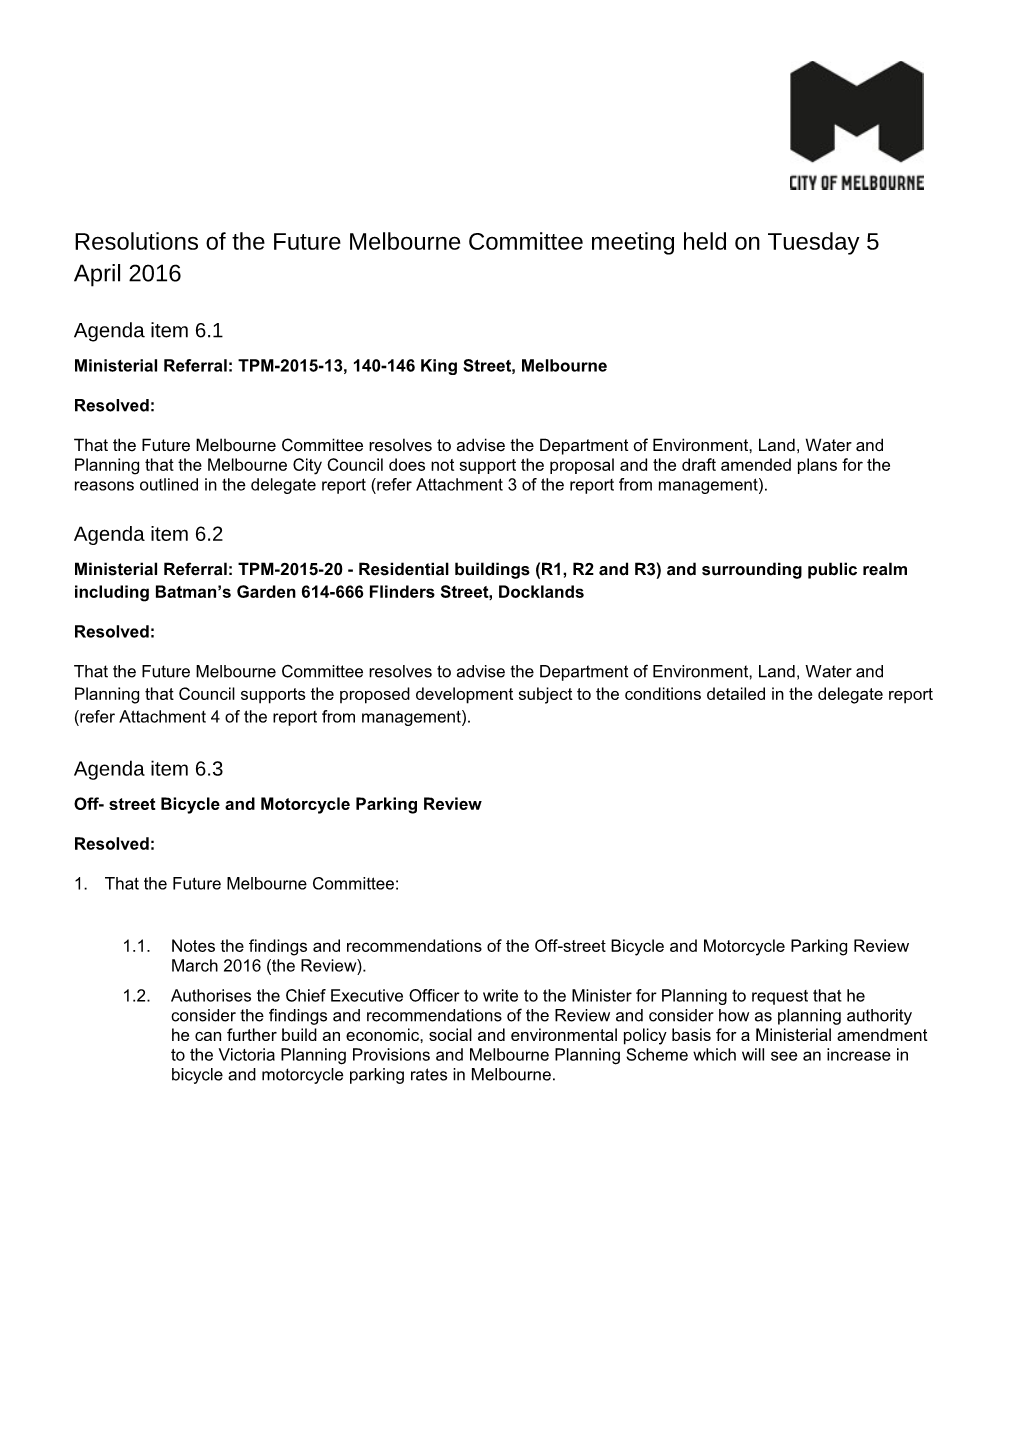 Resolutions of the Future Melbourne Committee Meeting Held on Tuesday 5 April 2016